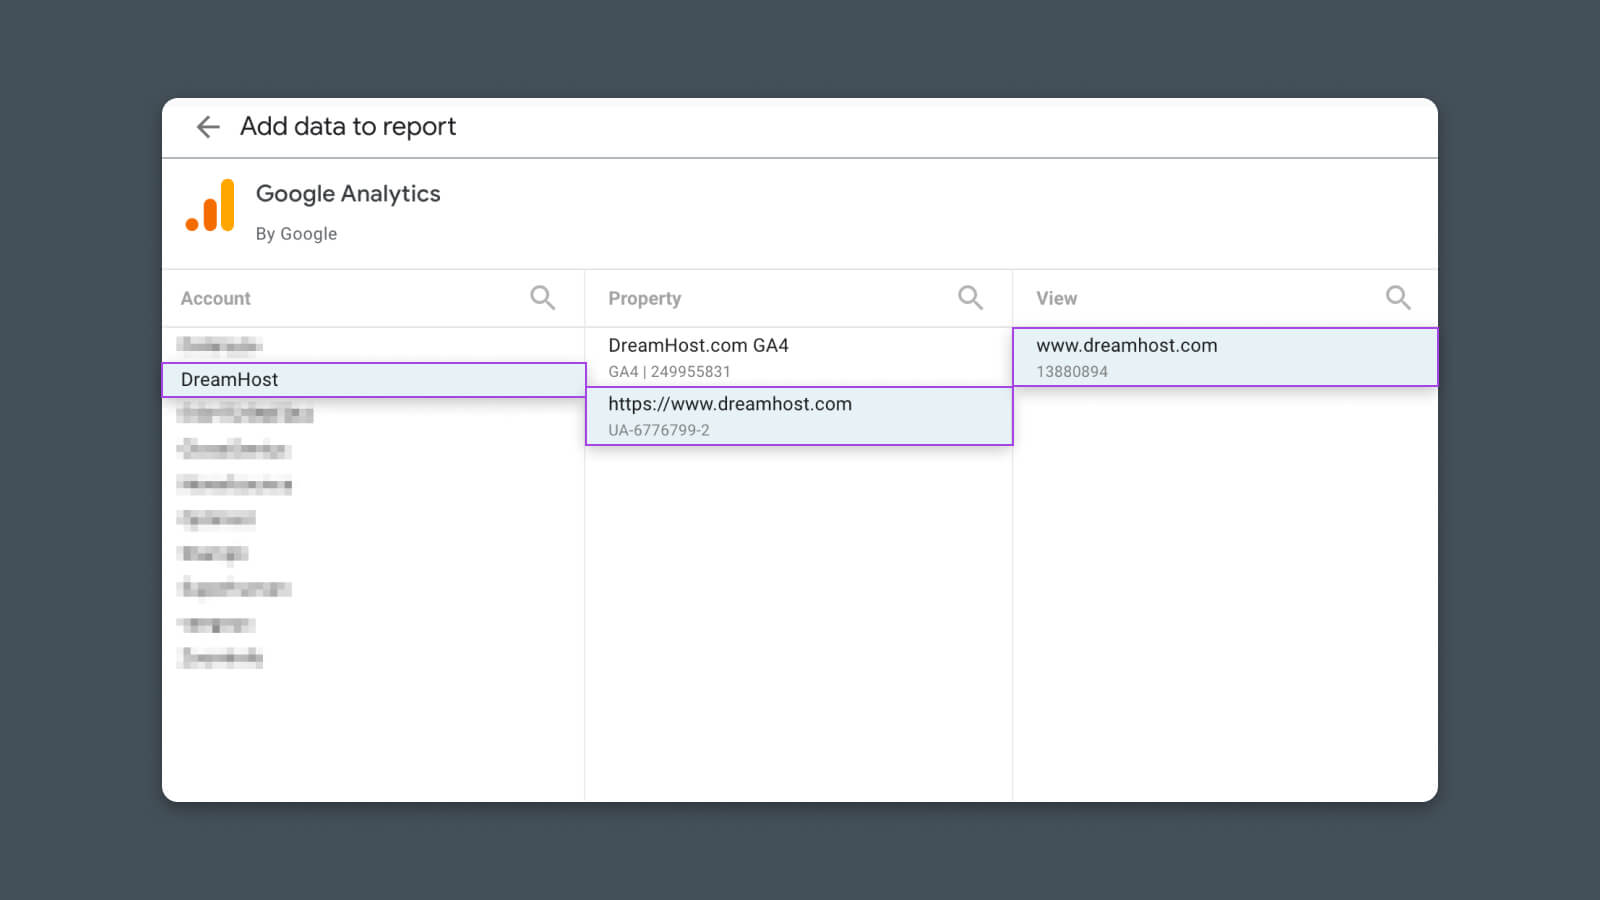 After you click “Authorize” and confirm, you should see a list of your connected Google Analytics accounts. Select the Account, Property, and View that you want to use for this report.